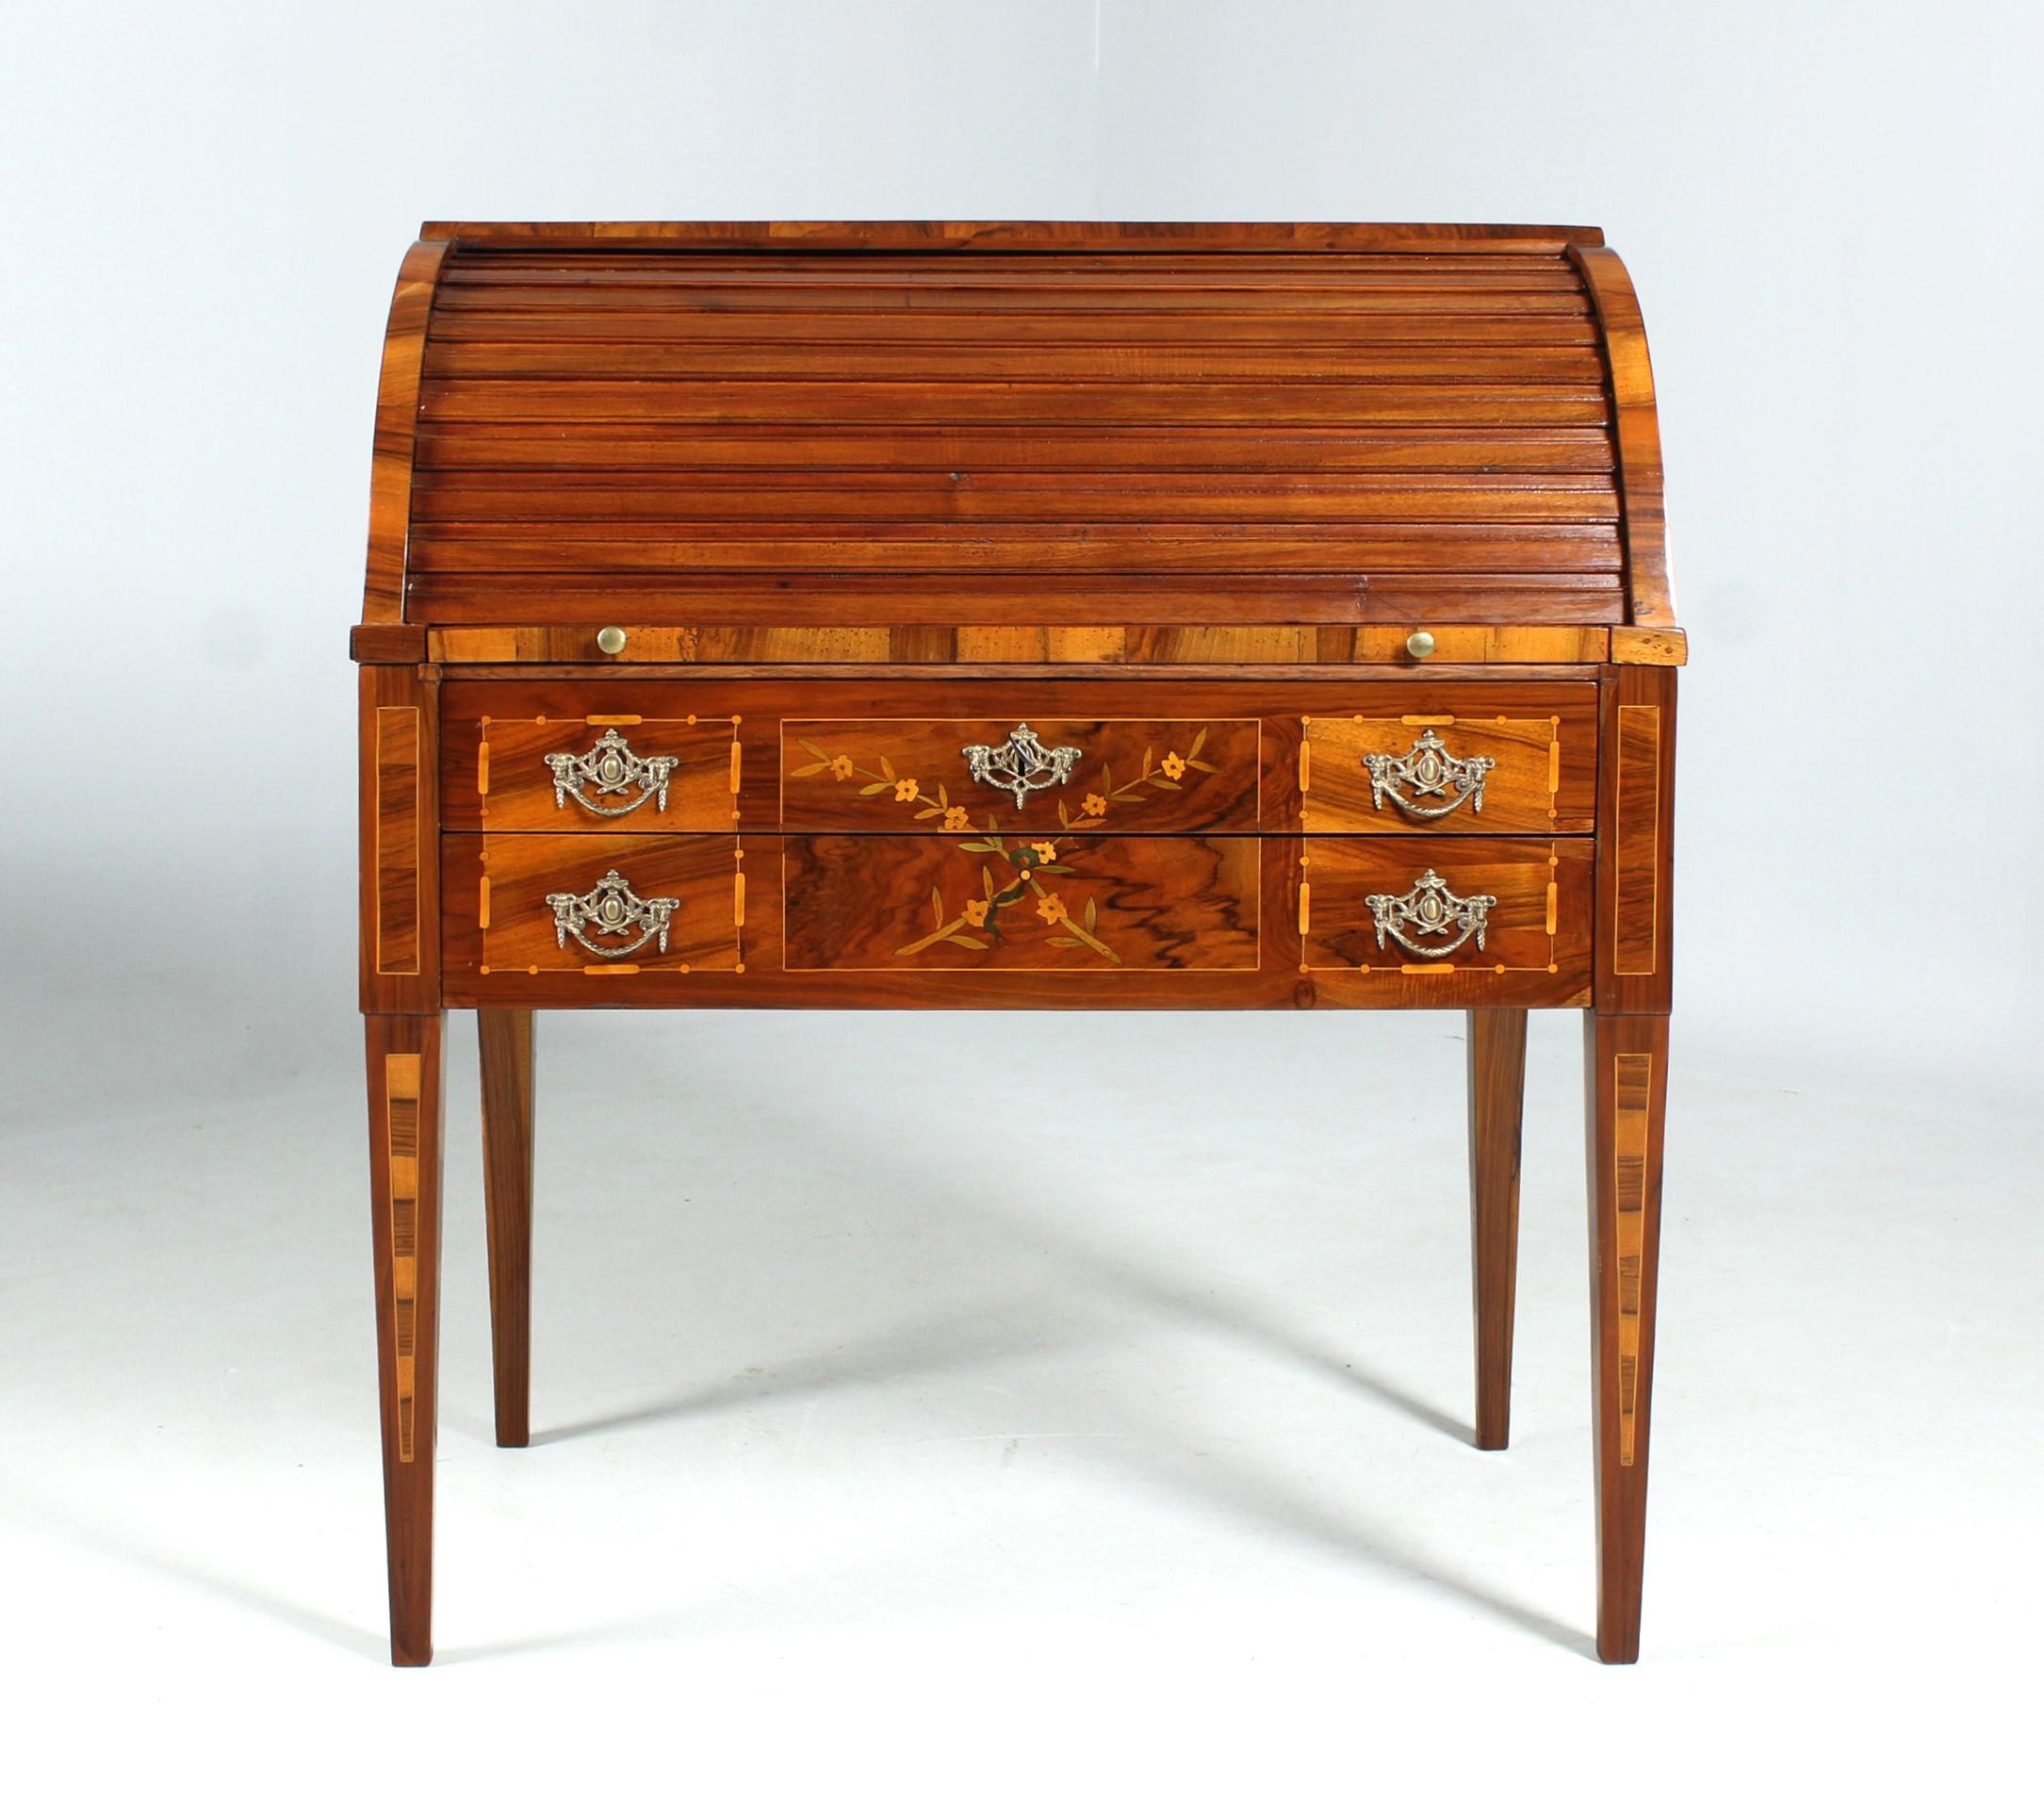 Louis XVI cylinder secretary in walnut, writing desk

West Germany
Walnut and others
Louis XVI around 1800

Dimensions: H x W x D: 112 x 96 x 62 cm

Description
Writing furniture on tapered square legs.

In the high frame there are two